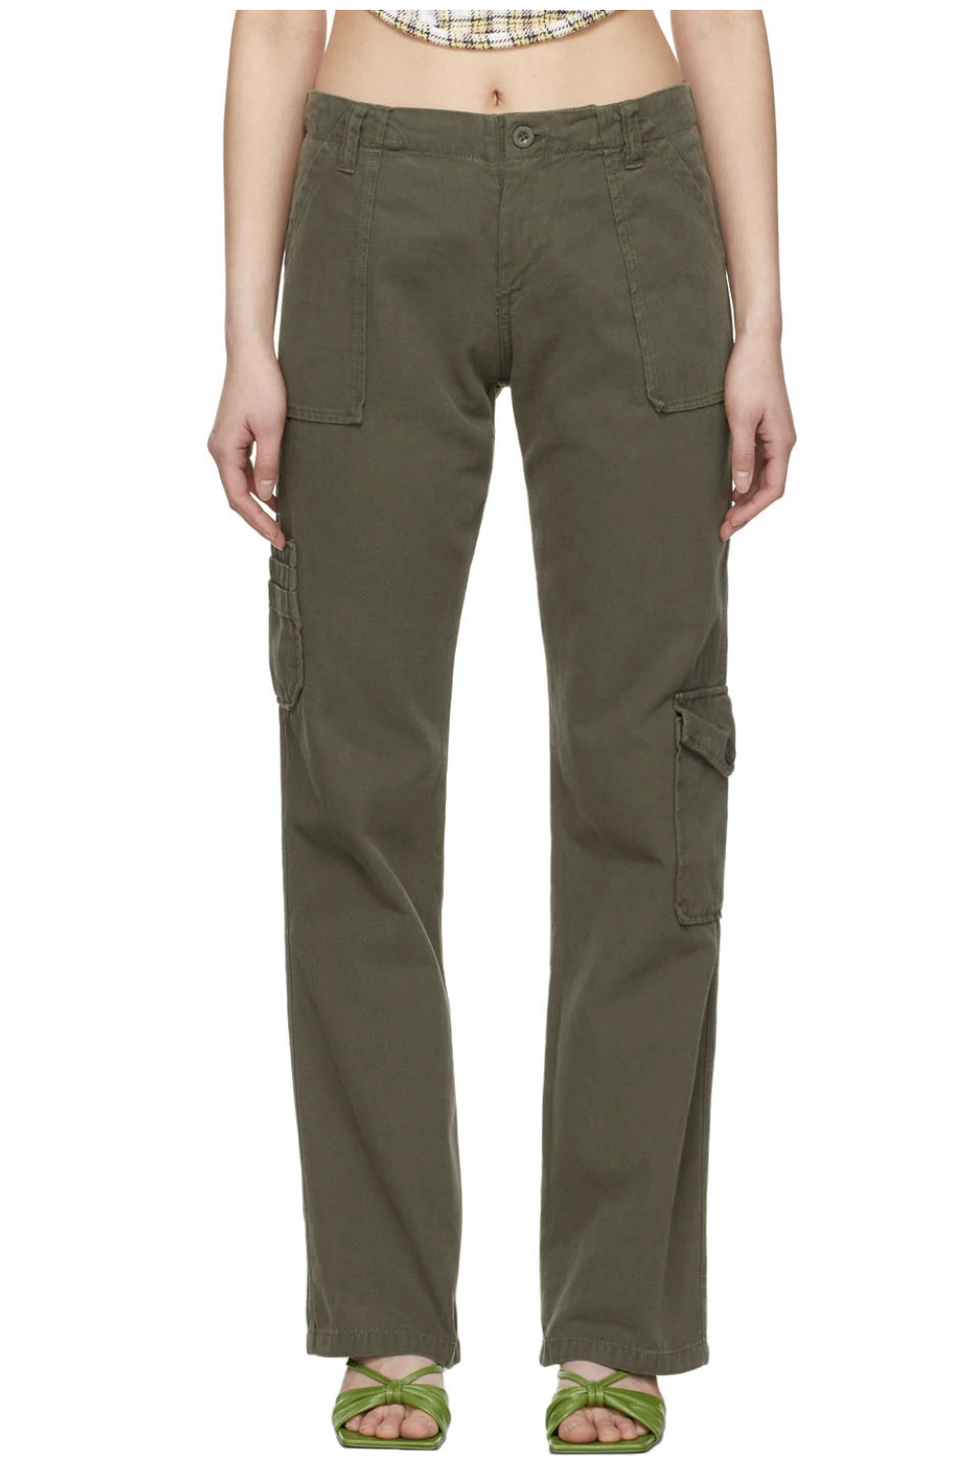 Cargo Pants Womens Straight High Waisted Trousers Pockets Street